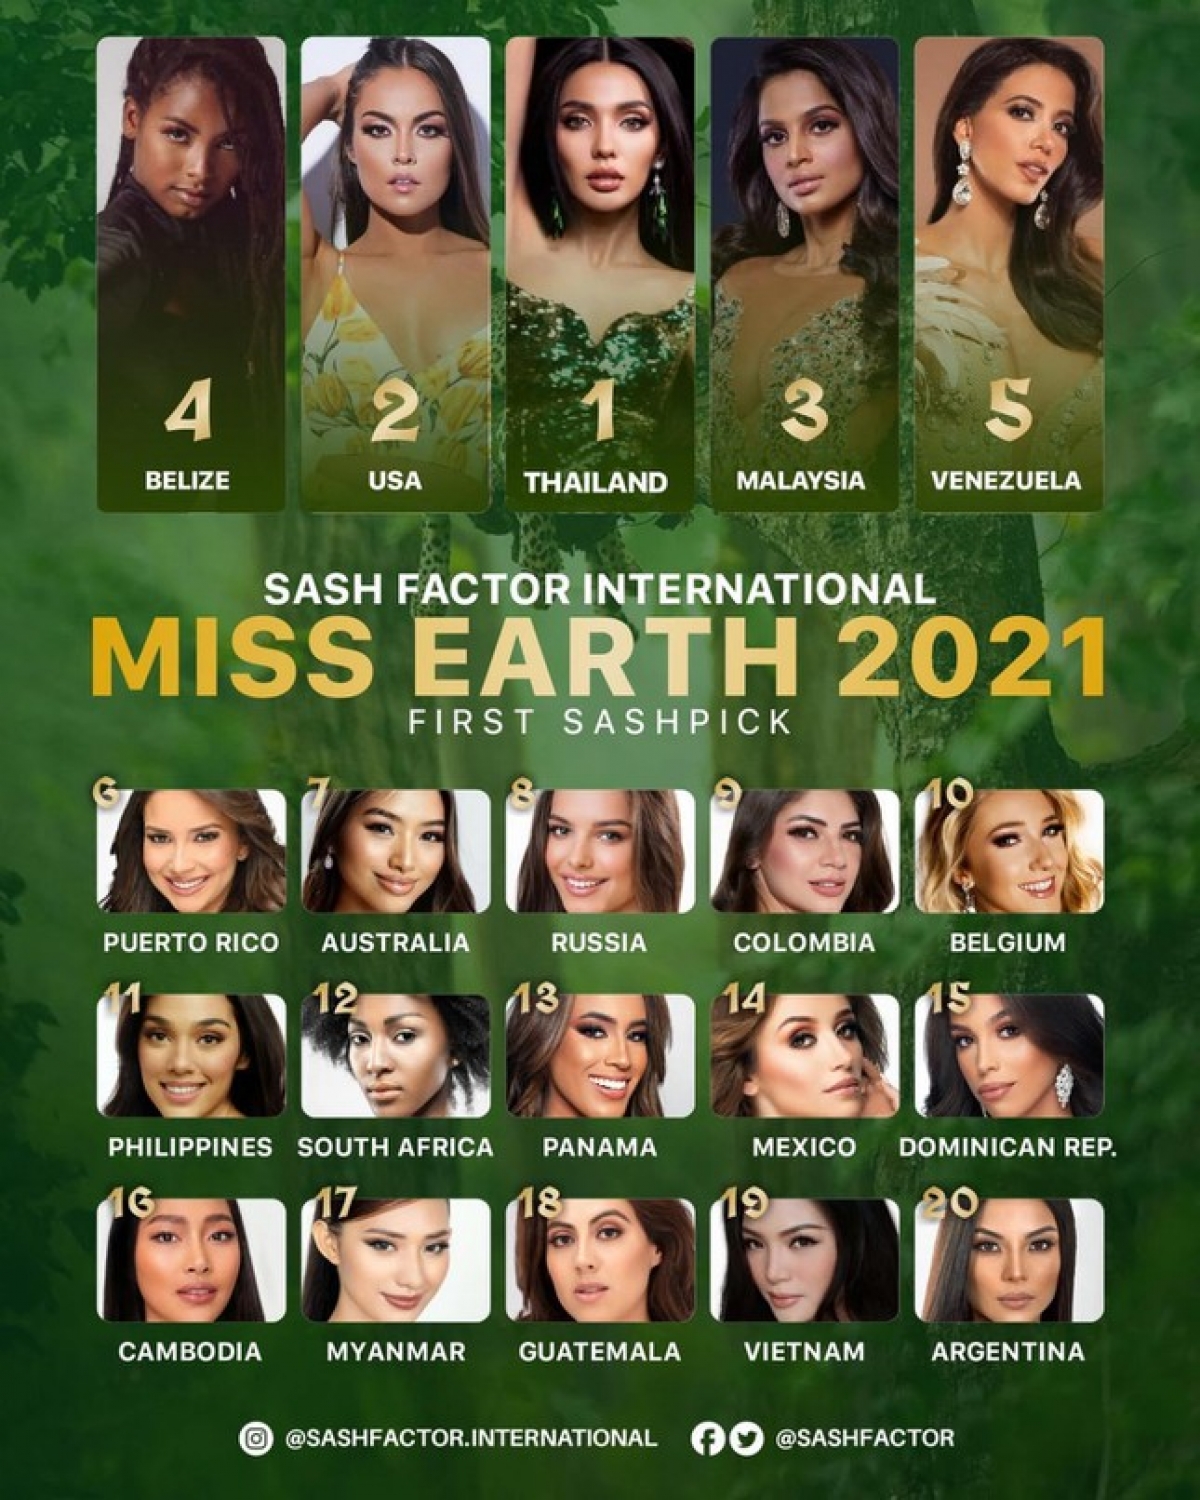 Van Anh, the Vietnamese representative at Miss Earth 2021, is expected to be named among its Top 20 leaderboard.